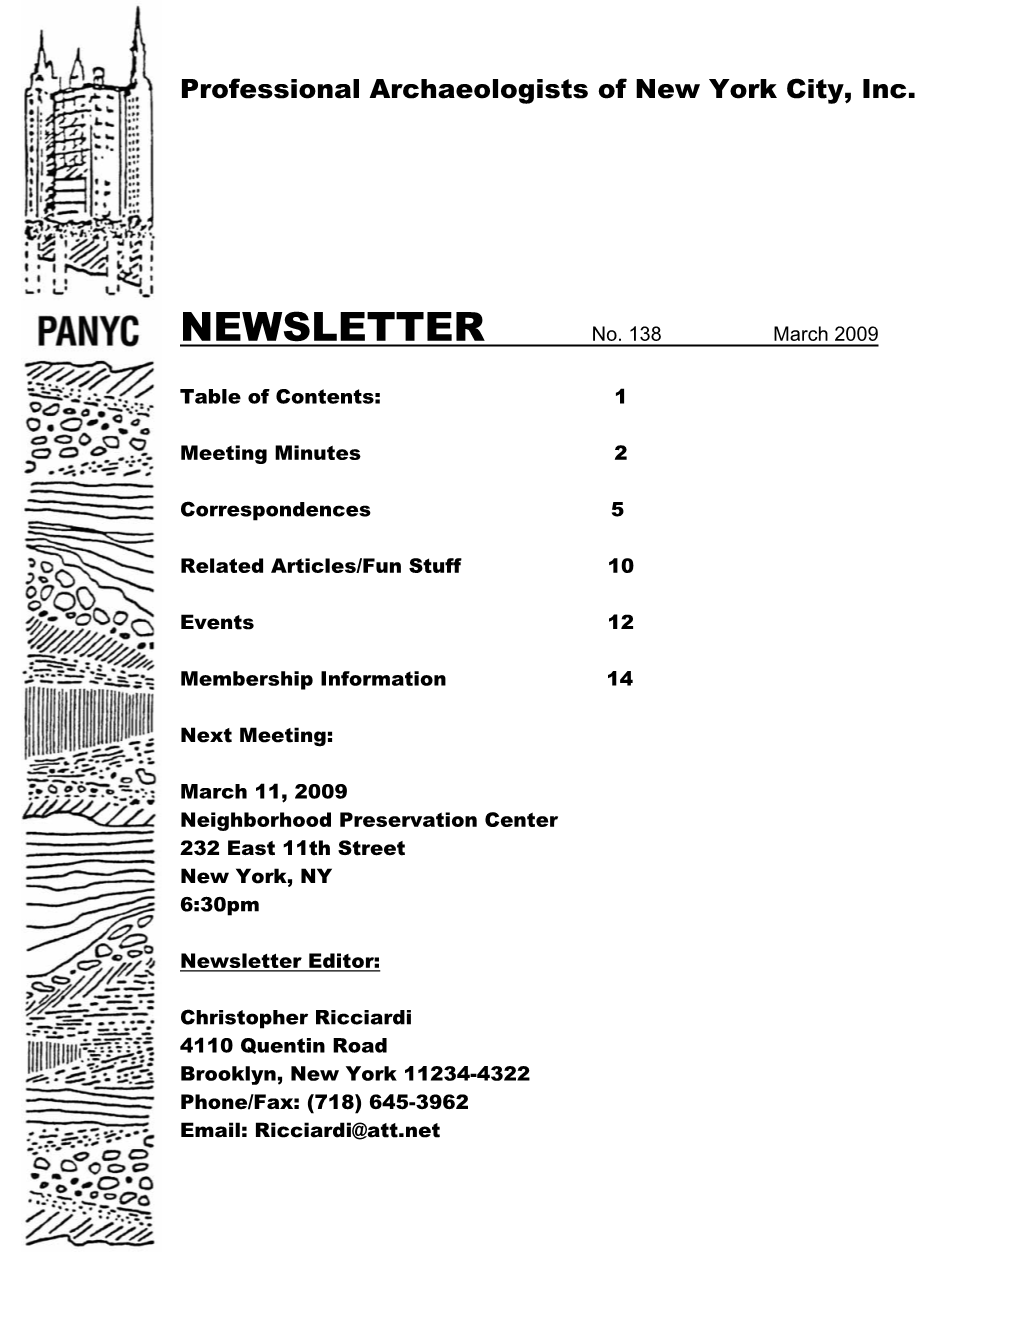 NEWSLETTER No. 138 March 2009